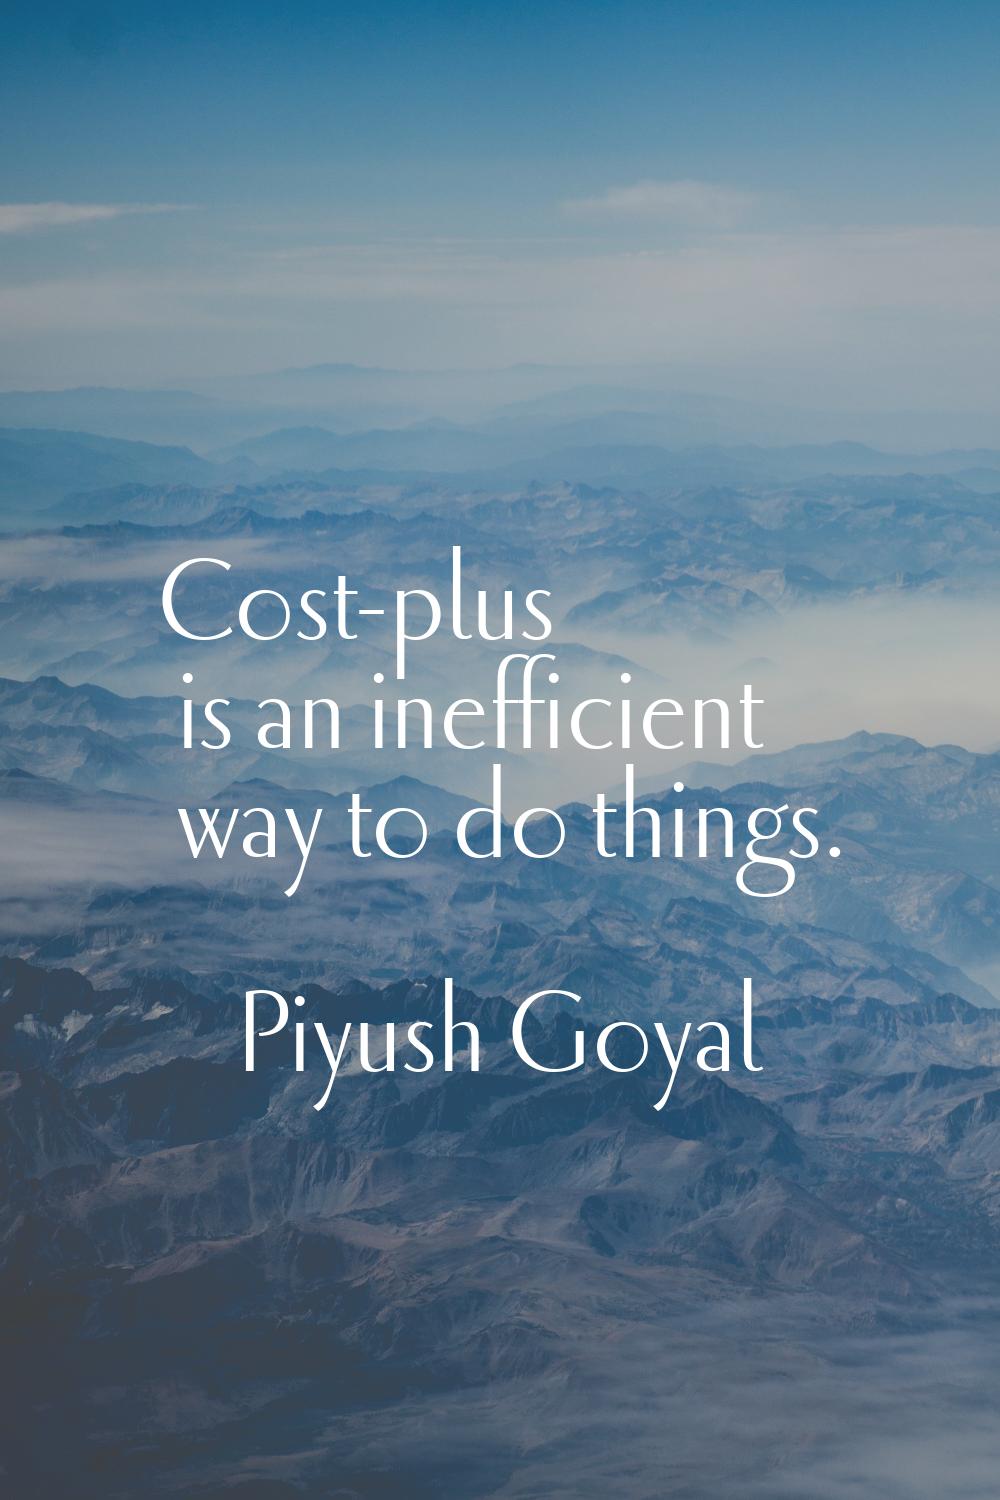 Cost-plus is an inefficient way to do things.